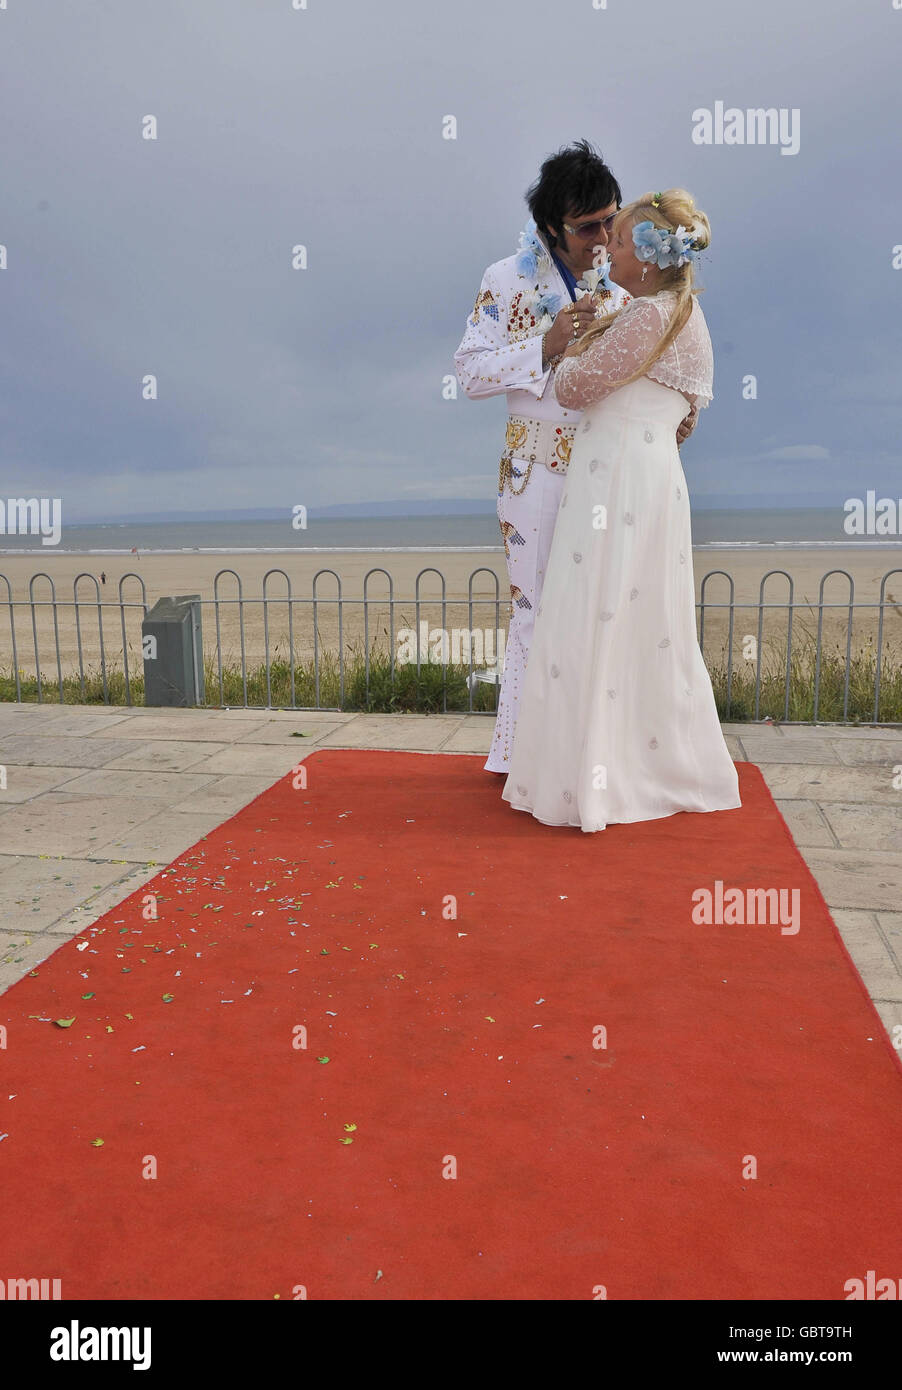 Steve Caprice, a leading professional Elvis tribute artist, and a fully ordained Minister, with his wife Barbara after their civil ceremony wedding in Porthcawl, Wales. The ceremony was a faithful recreation of the wedding scene from Elvis' Blue Hawaii film. Stock Photo